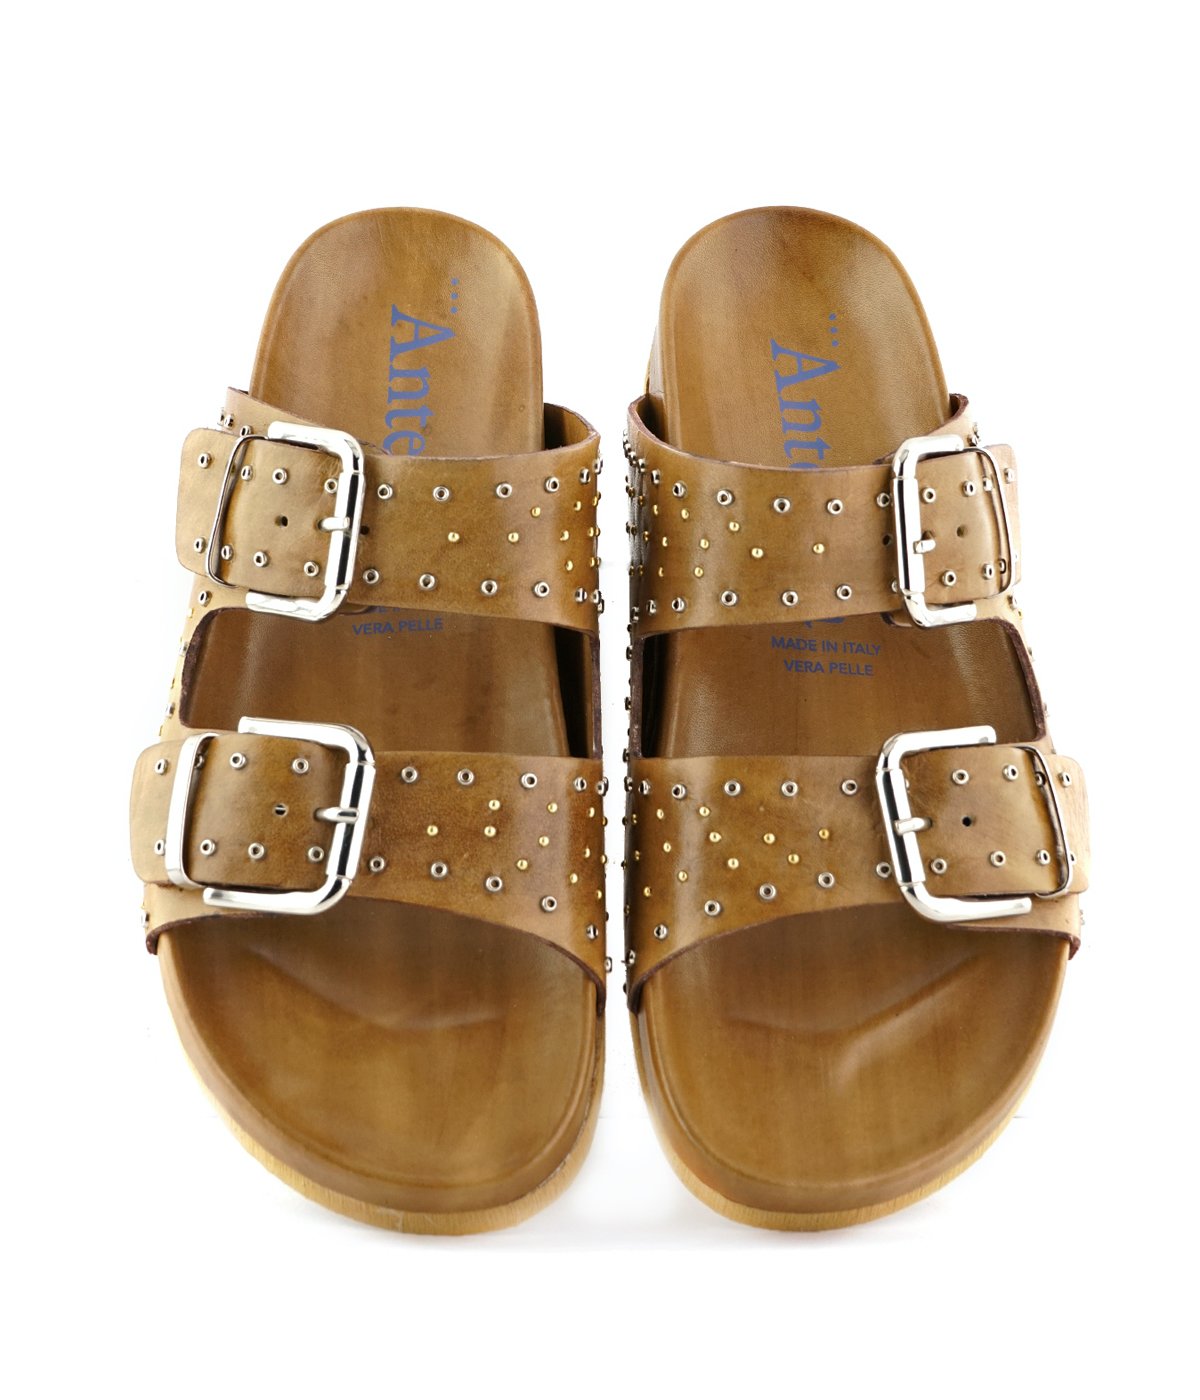 Lexi Sandals in Noce